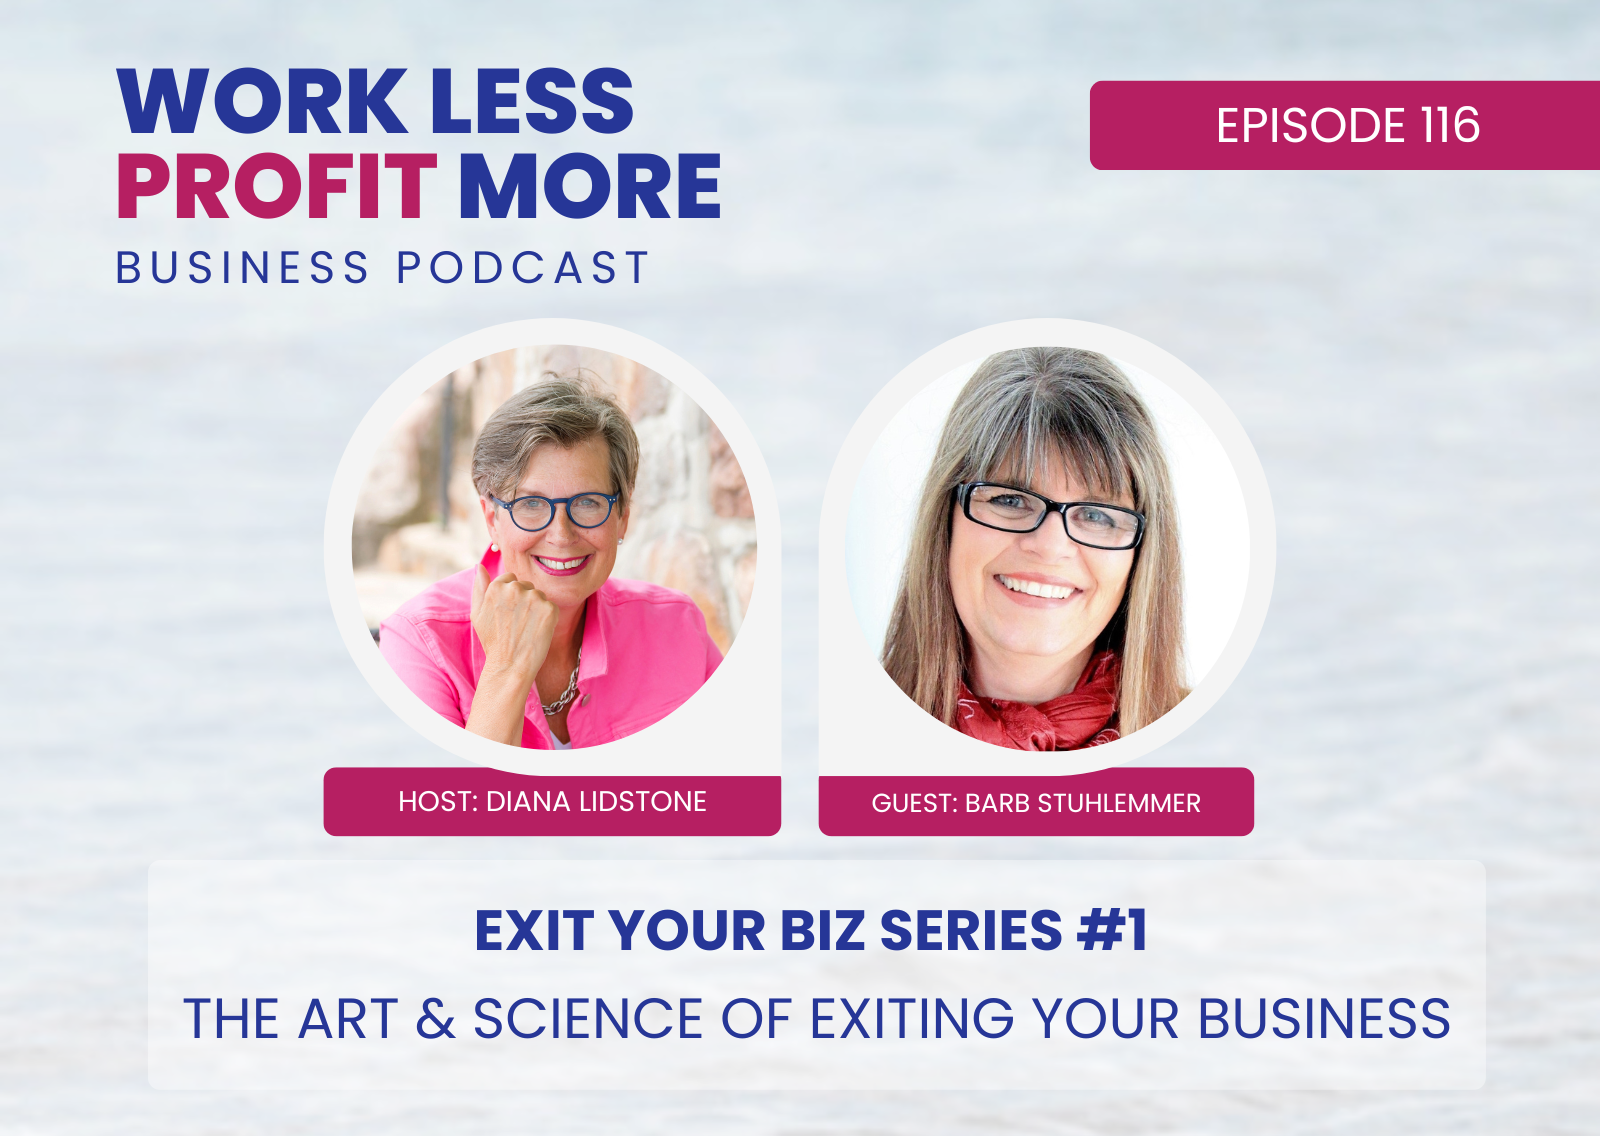 The Art & Science of Exiting Your Business